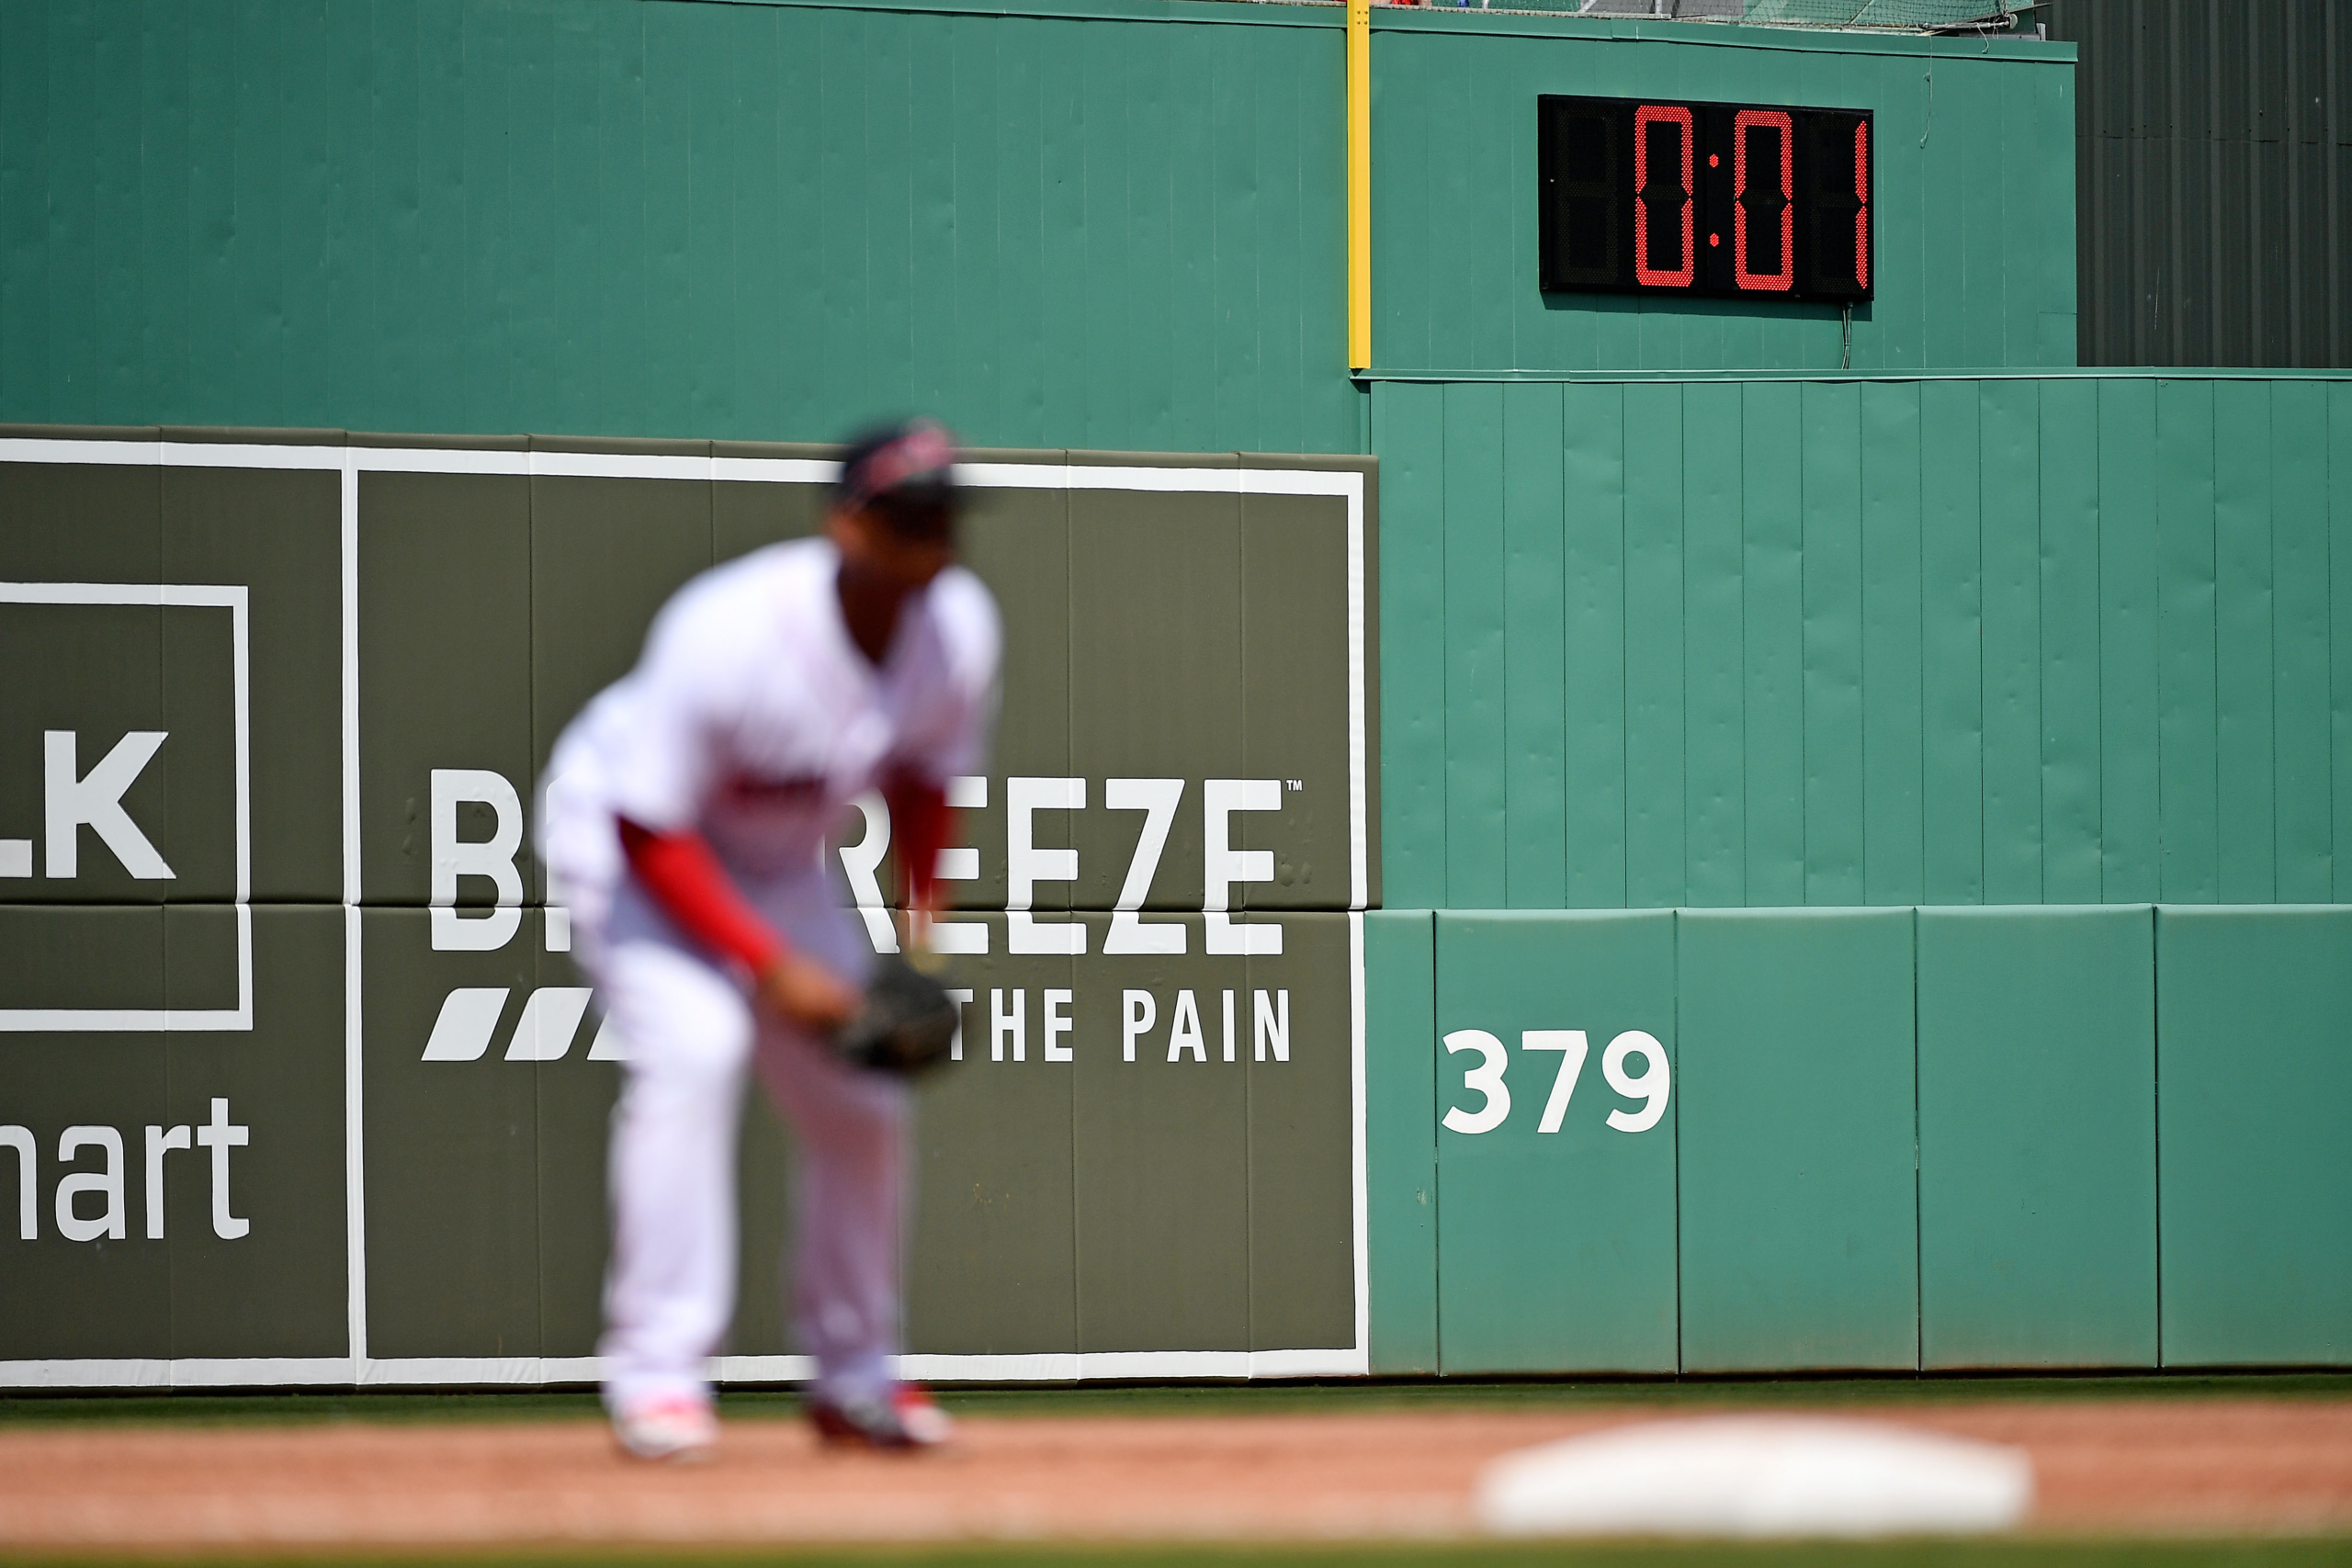 MLB implementing pitch clock, banning defensive shifts beginning in 2023